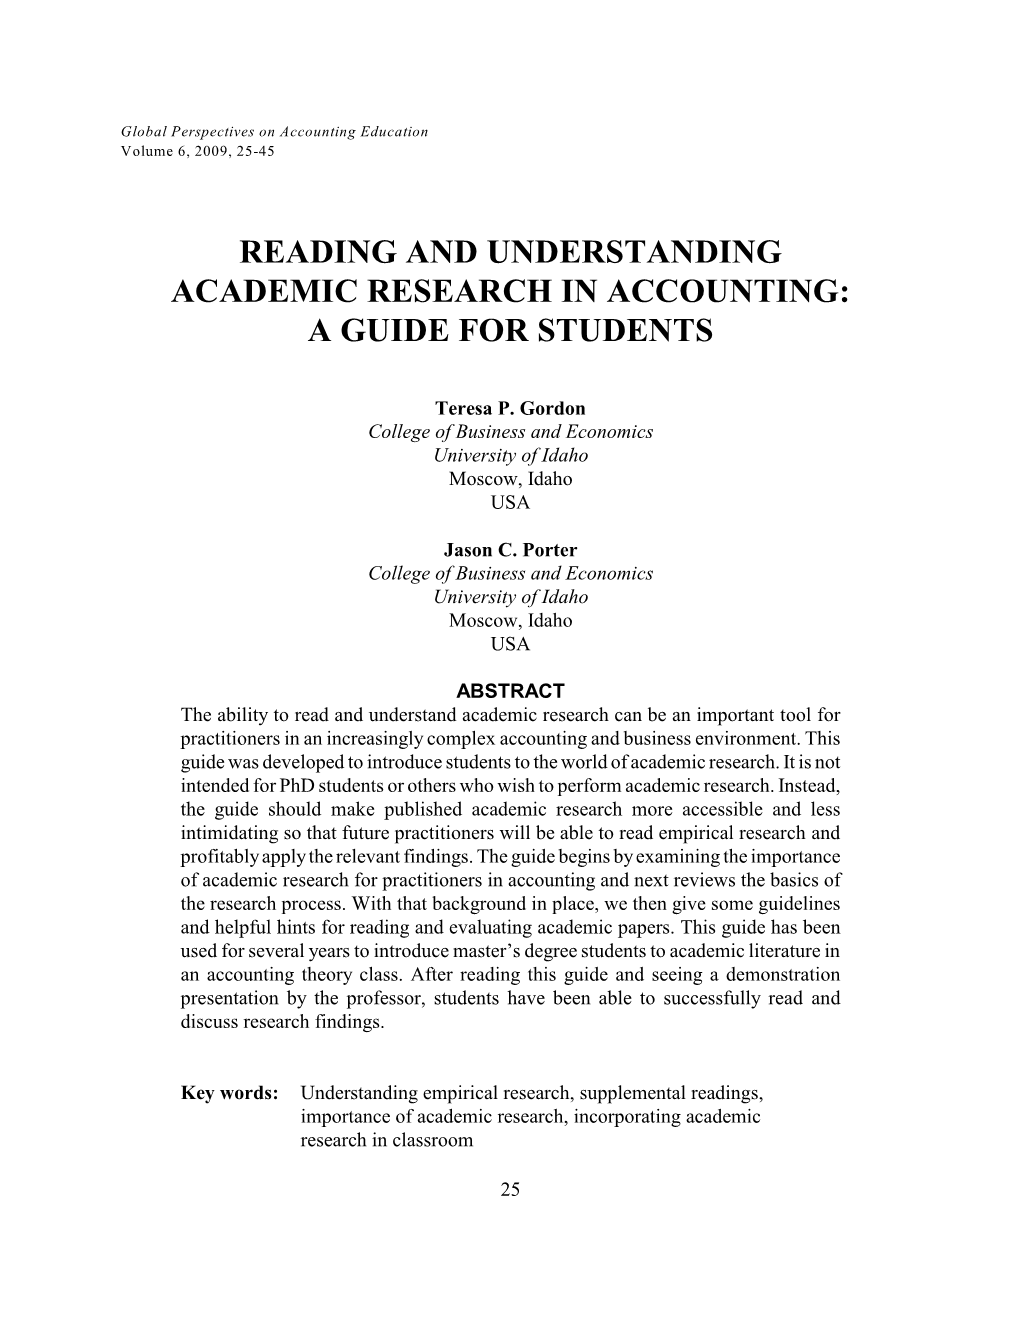 Reading and Understanding Academic Research in Accounting: a Guide for Students